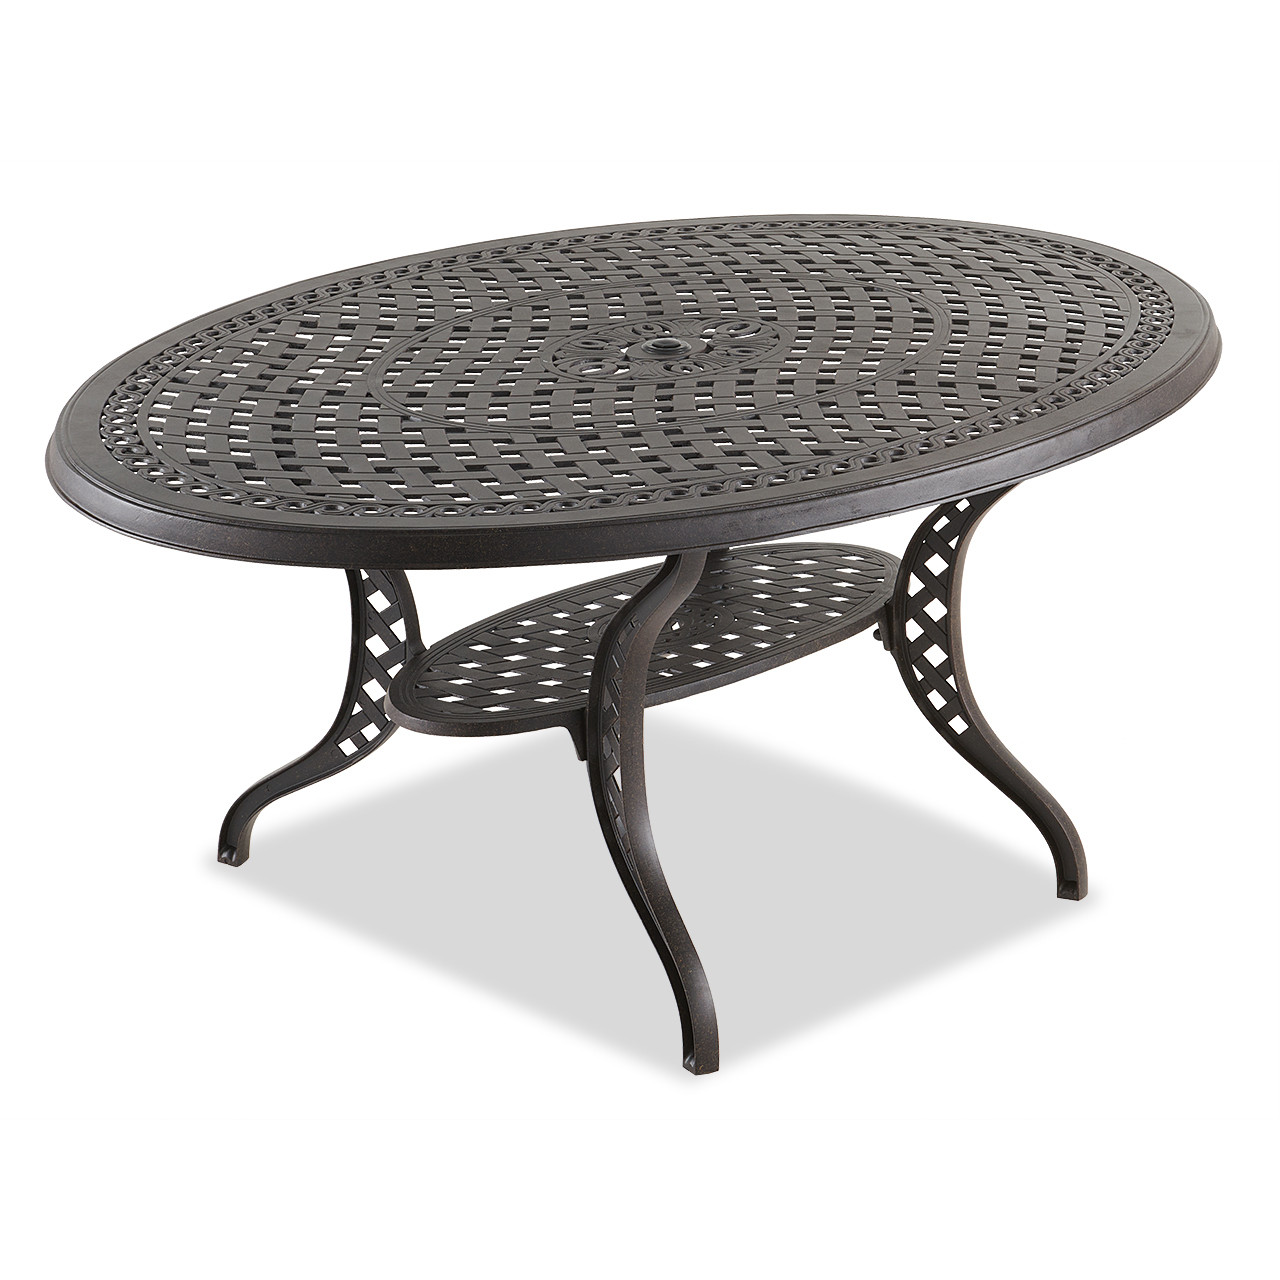 San Remo Aged Bronze Cast Aluminum 66 x 44 in. Dining Table